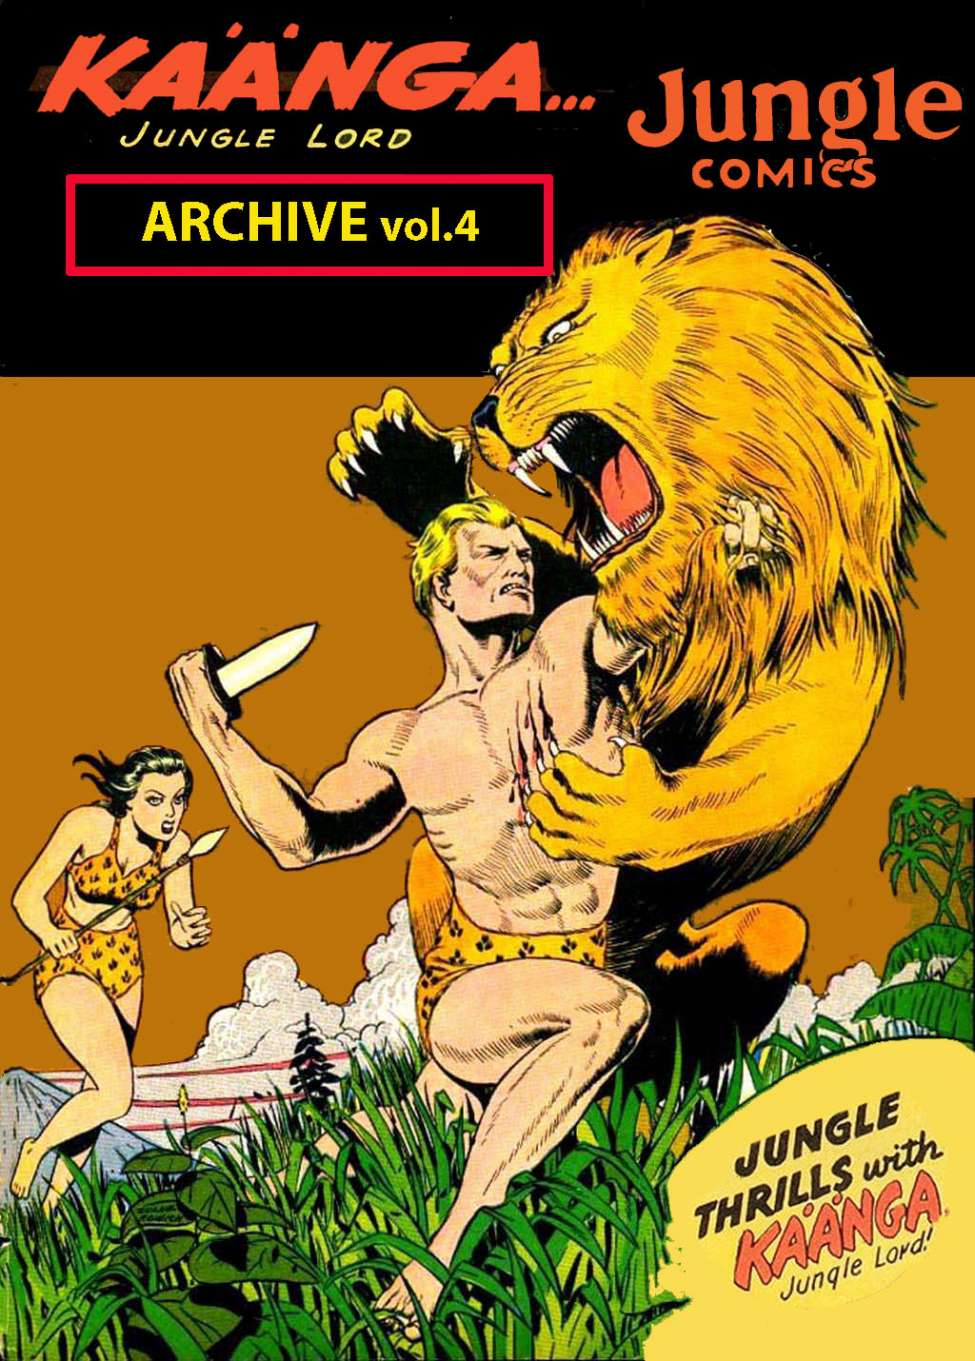 Book Cover For Kaanga vol.4 -Jungle Comics Archive (Fiction House)